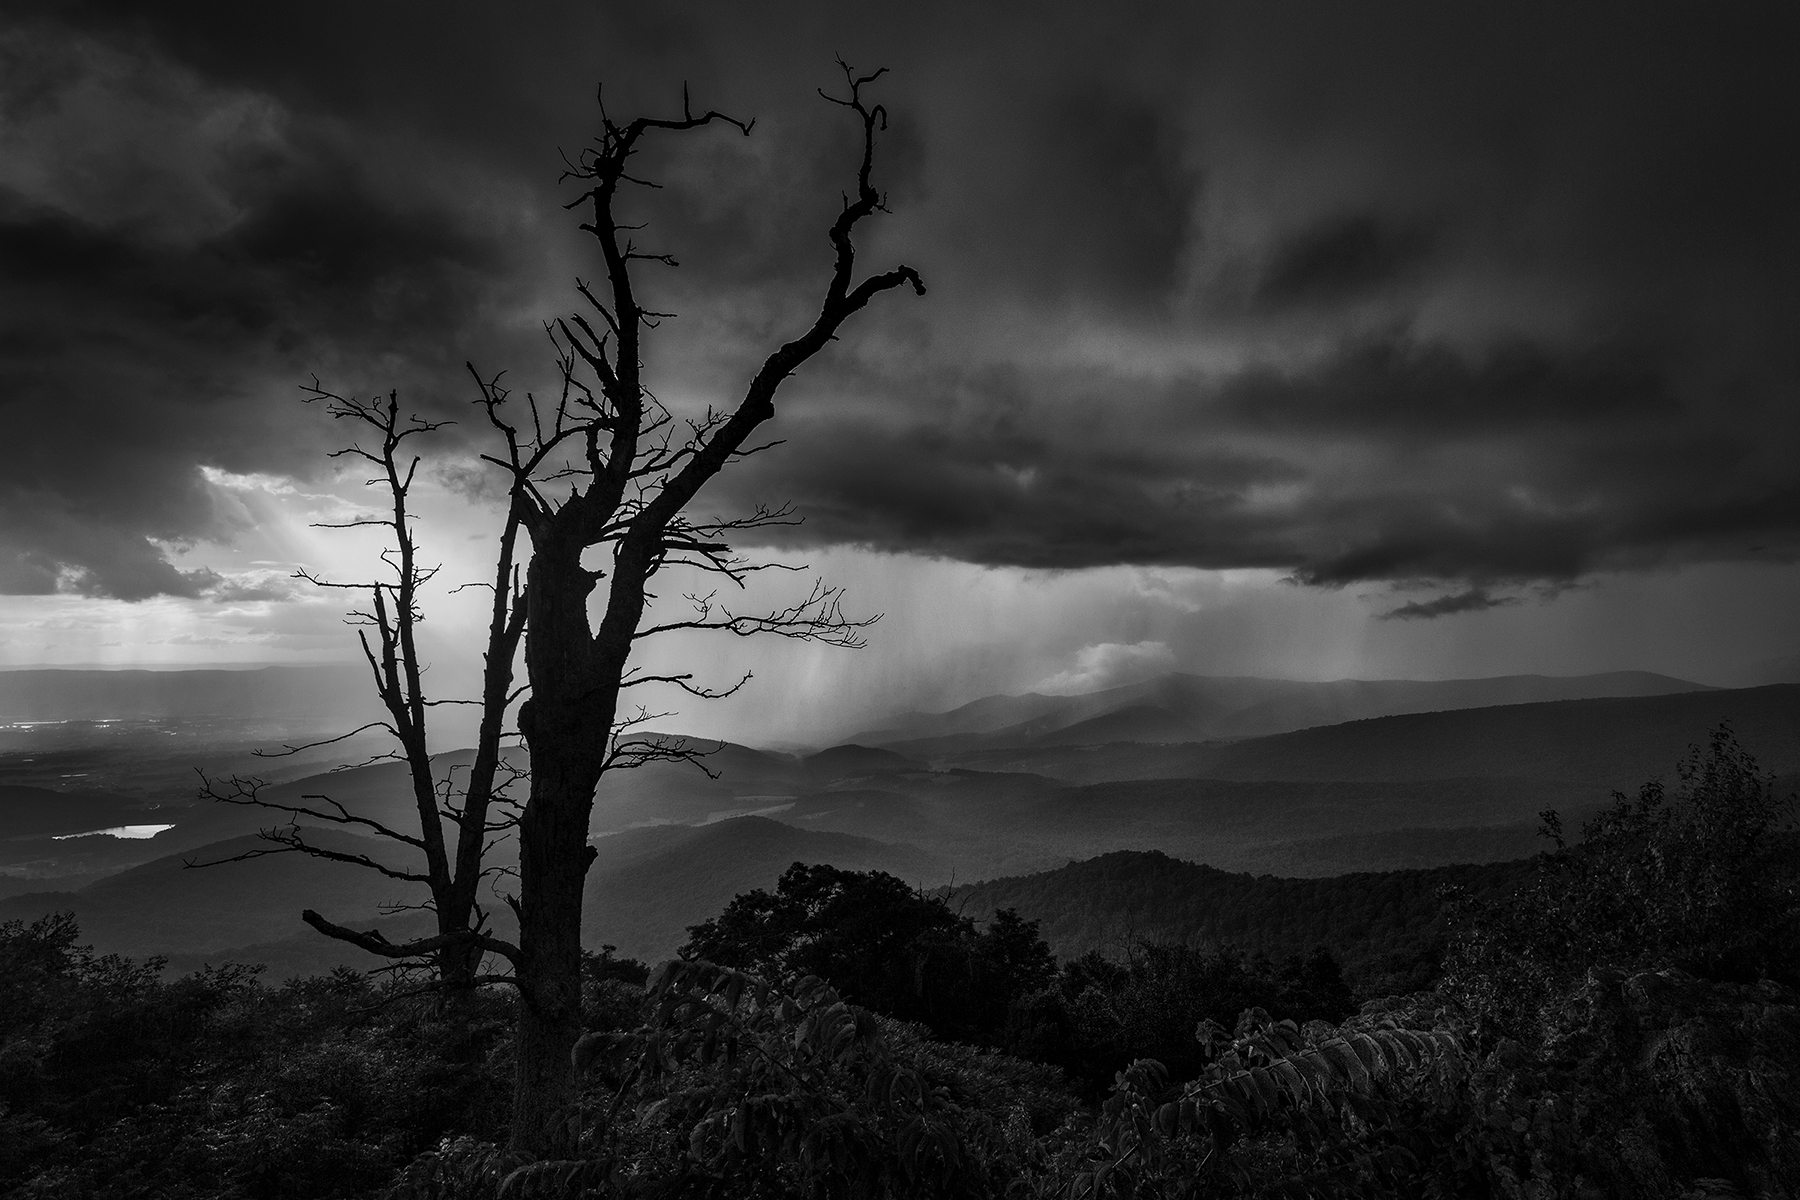 Storm moving through the Shenandoah National Park mountains - LostValley